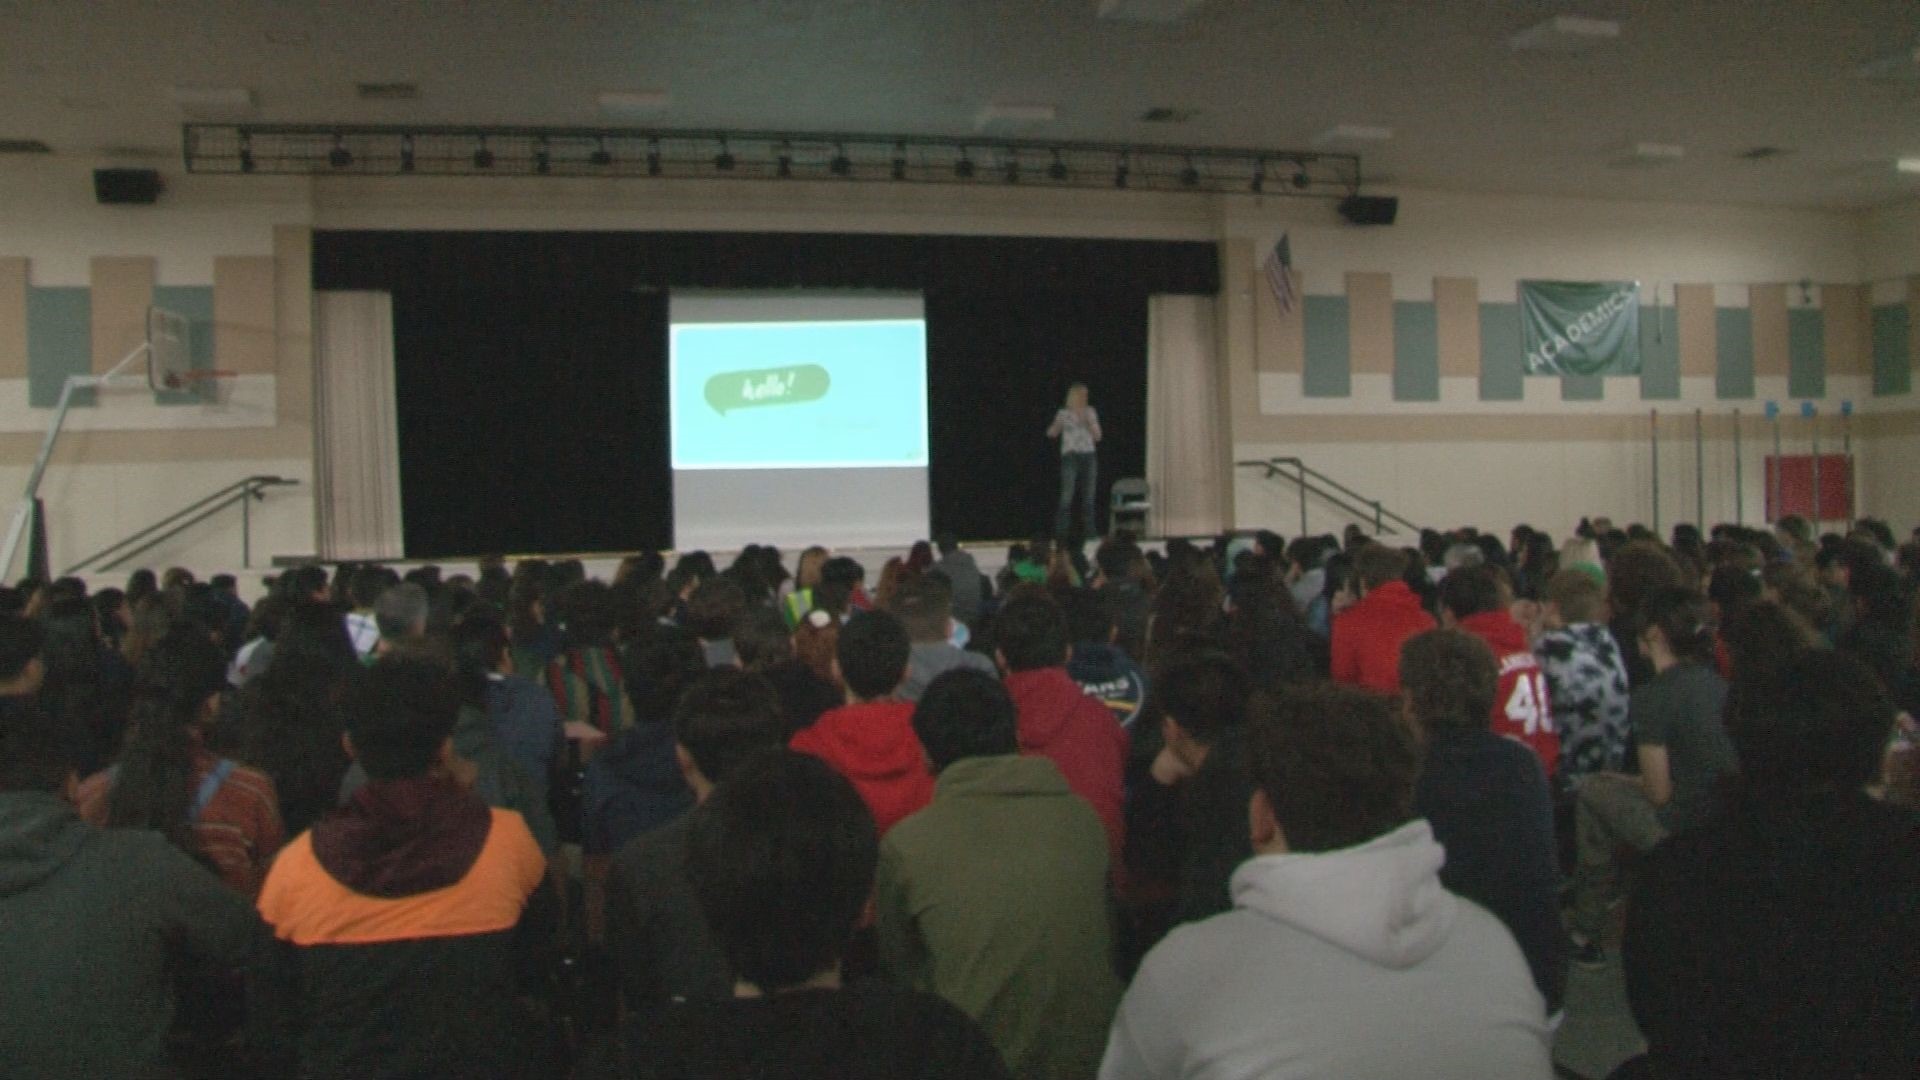 The non-profit organization Sandy Hook Promise held a pair of school assemblies at Lodi Millswood Middle School. The organization is led by several family members of loved ones killed in the December 14, 2012 shootings at Sandy Hook Elementary School in Newtown, Connecticut.